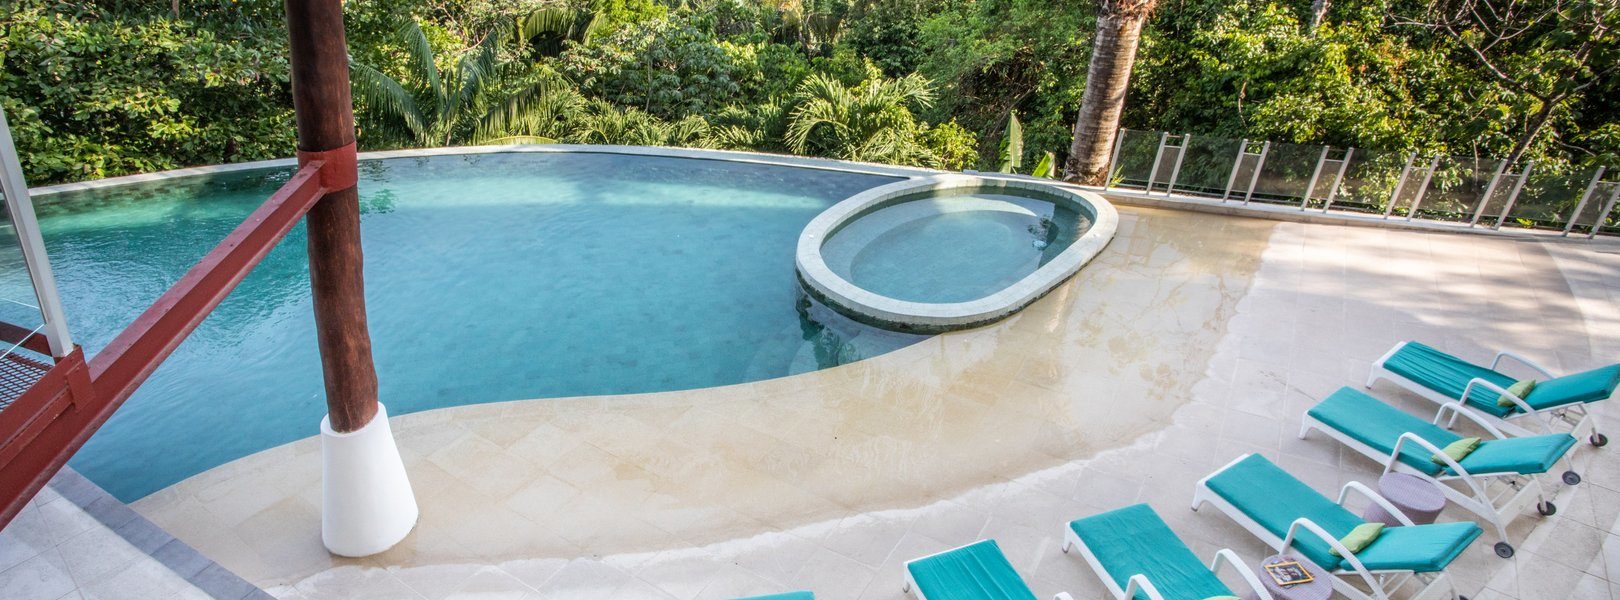 Lounge chairs surround parts of this truly awesome infinity pool, giving you time tortillas after a long days worth of vacationing.